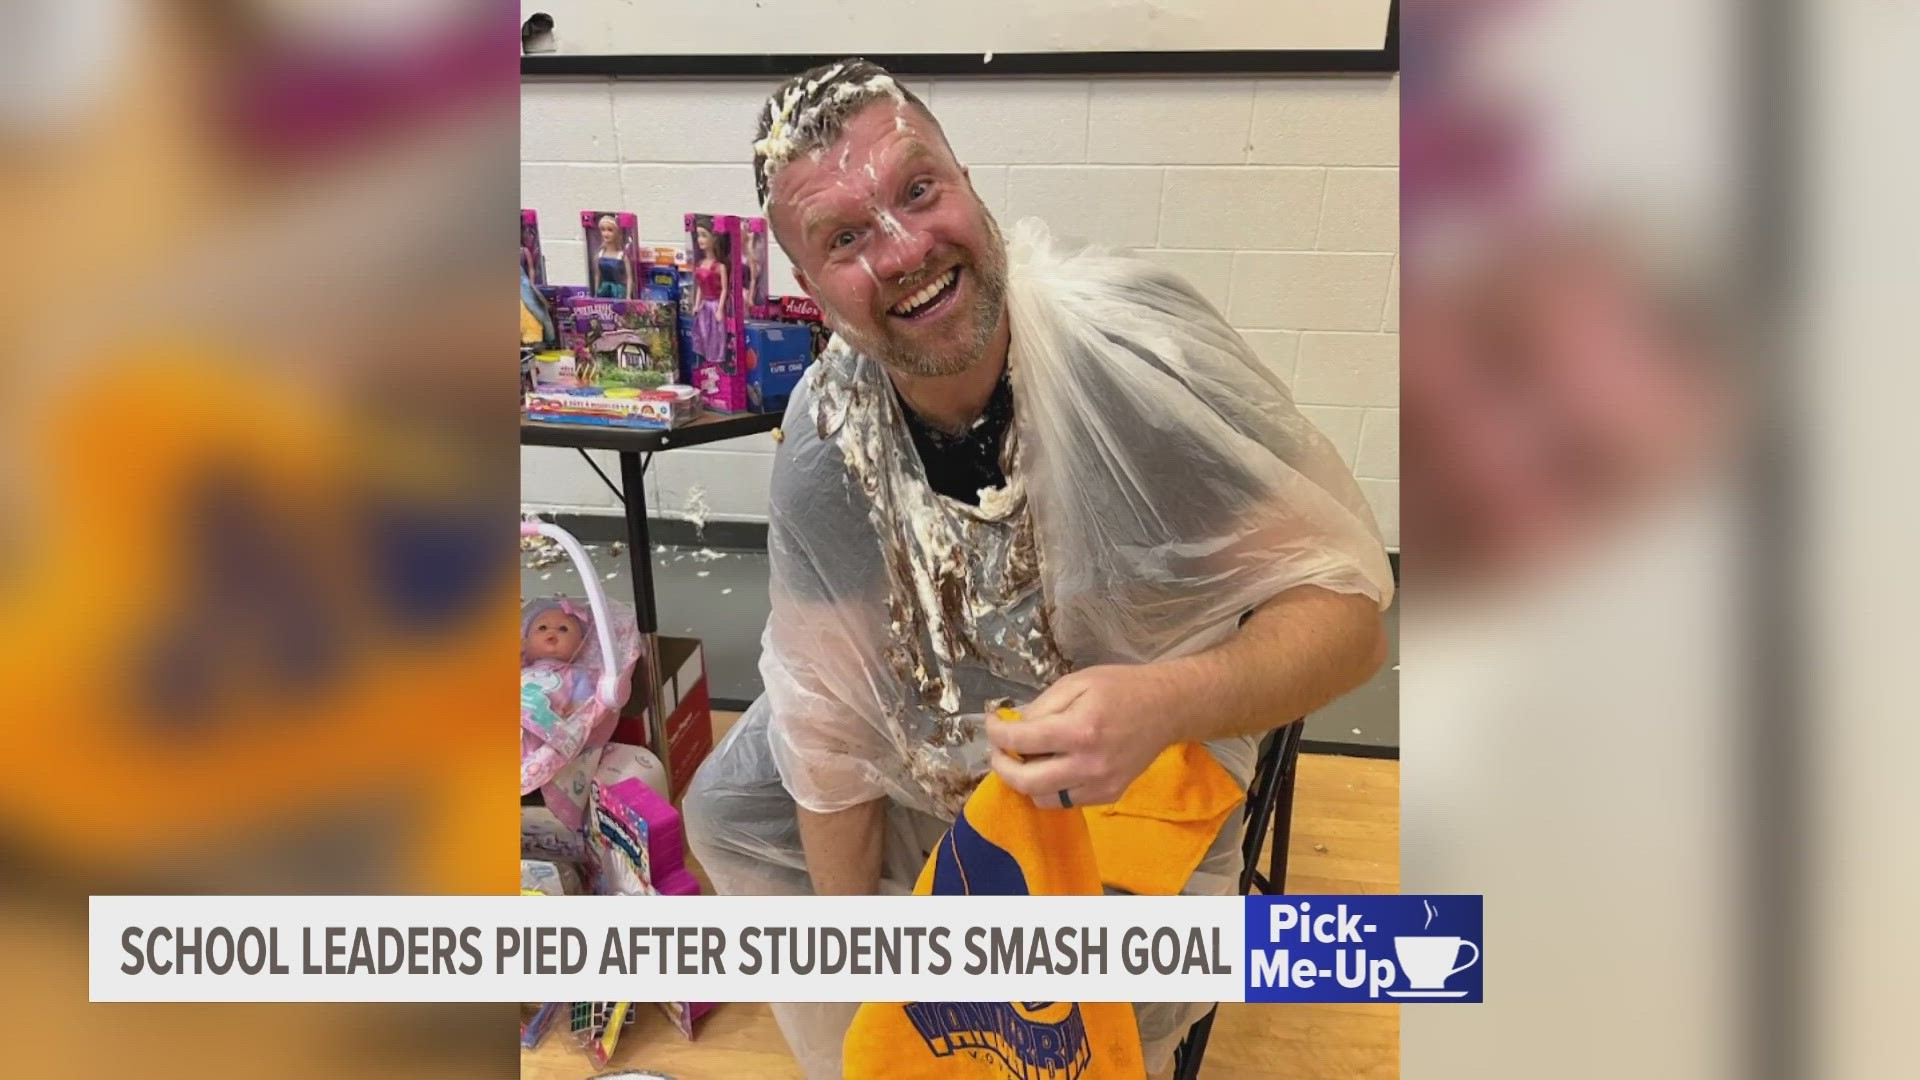 Students at Vanderbilt Charter Academy raised over 100 toys, and Principal Jeff Groffel and Middle School Dean Josh Rhoad got pied as a reward.